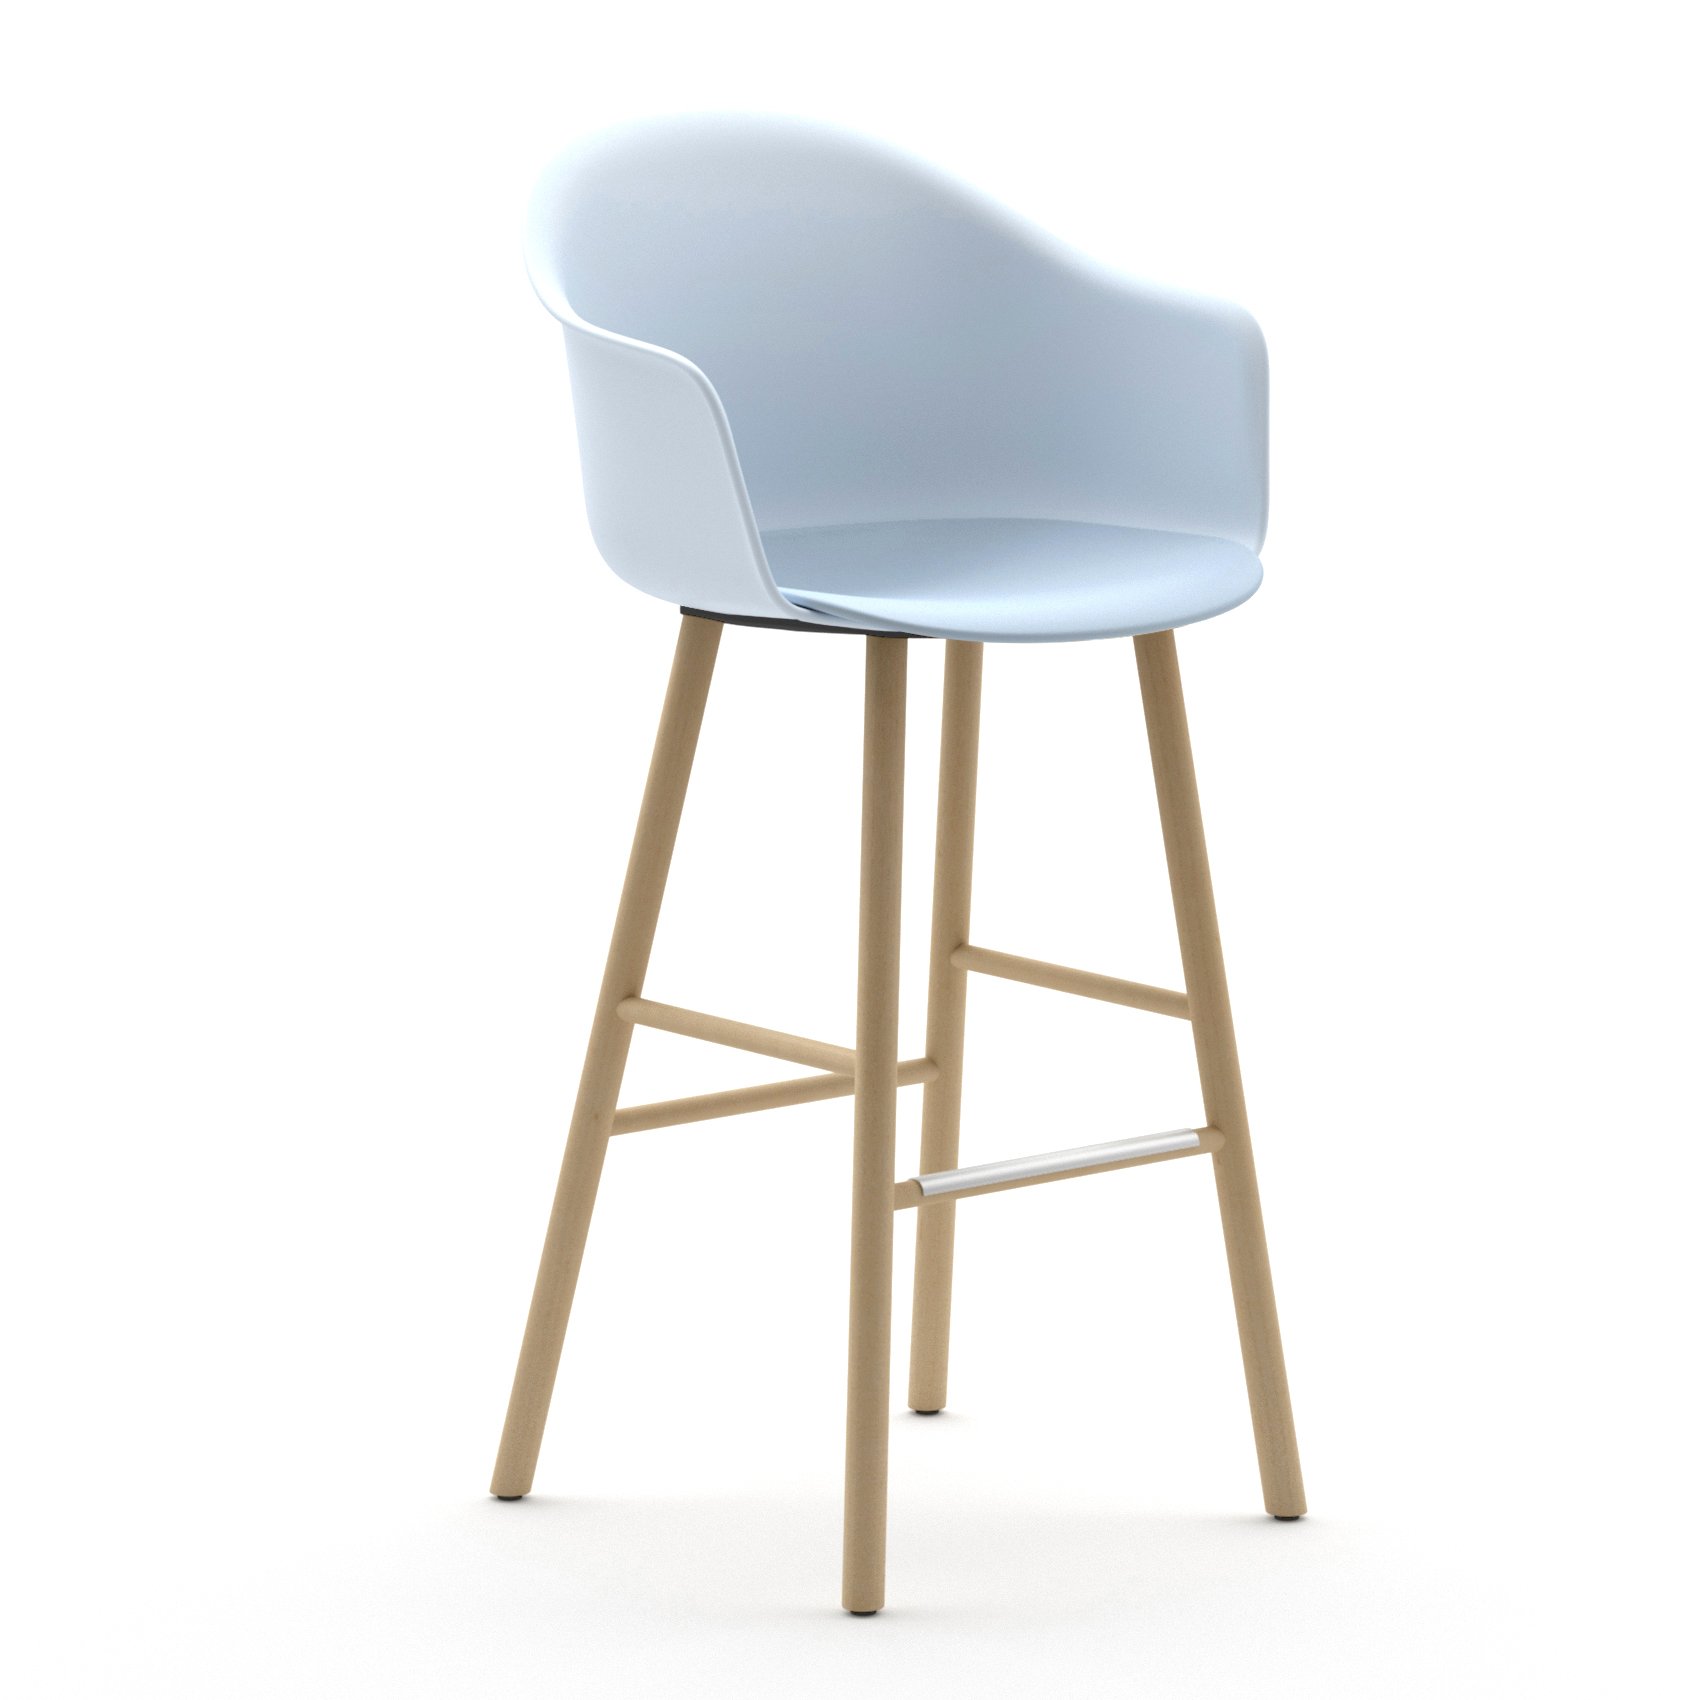 Mani Armshell ST-4WL Stool from Arrmet, designed by Welling/Ludvik